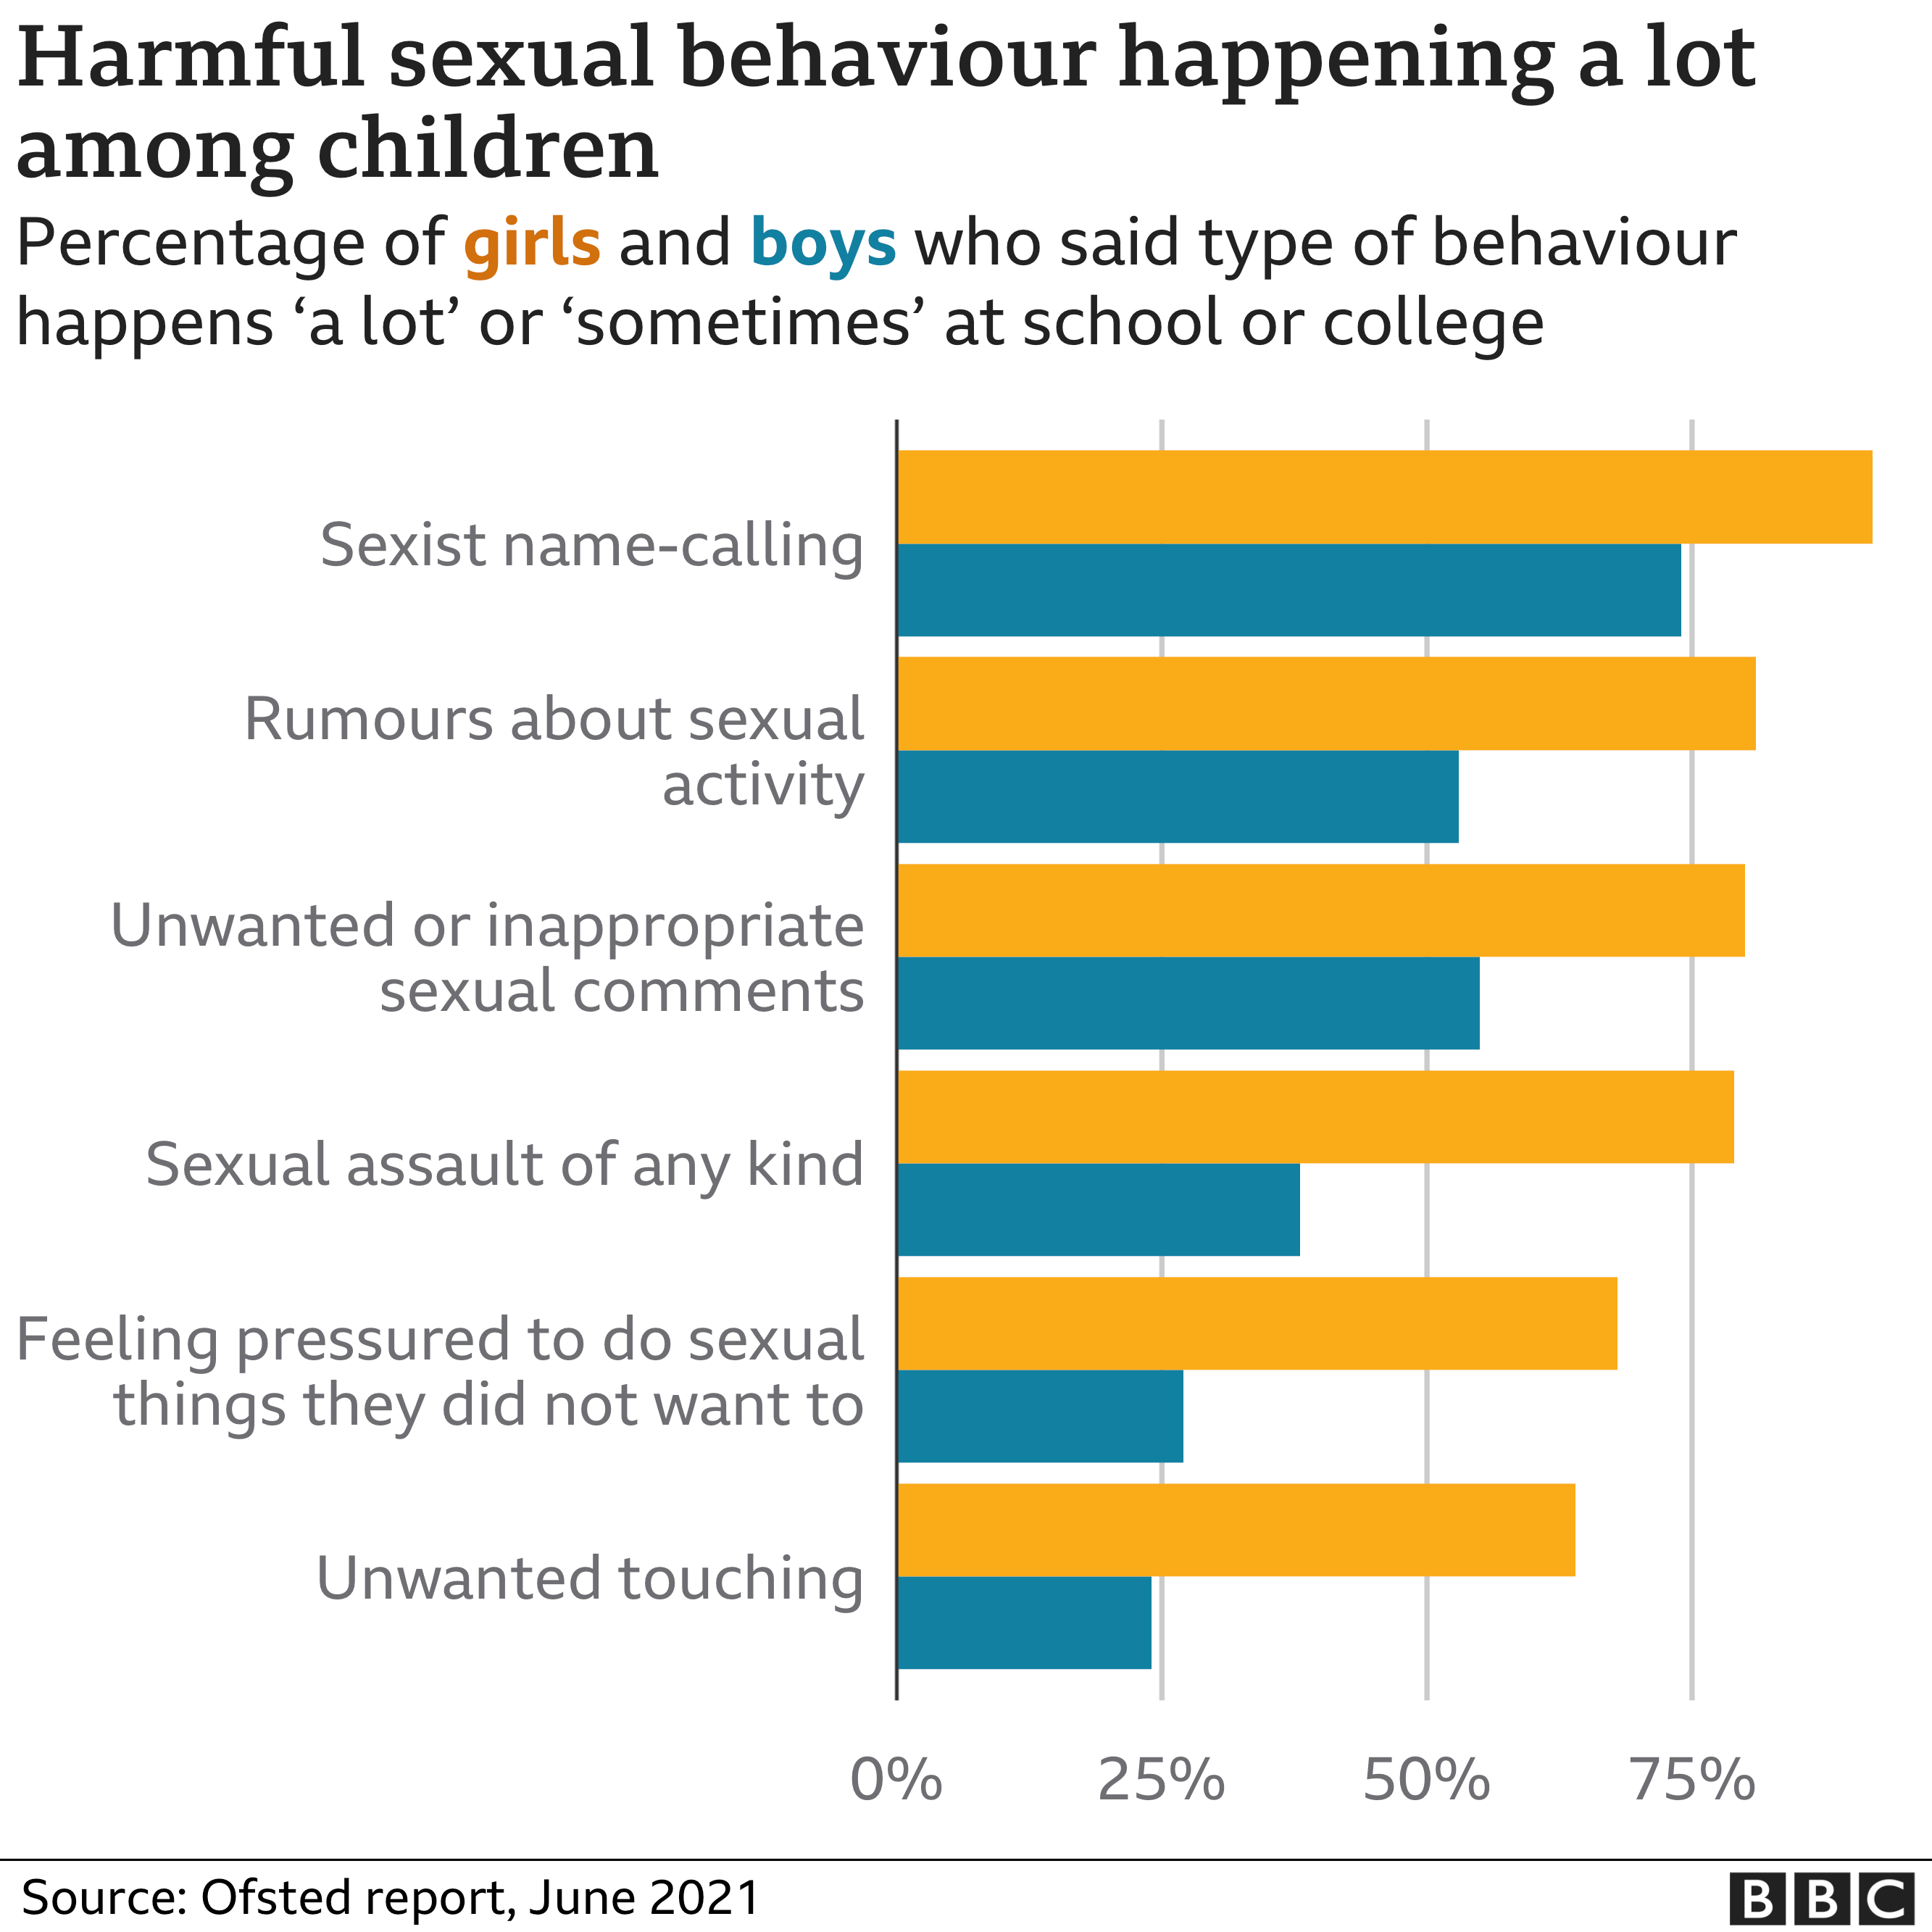 Graphic showing the Ofsted report data on the percentage of children who said they had experienced harmful sexual behaviour at school or college